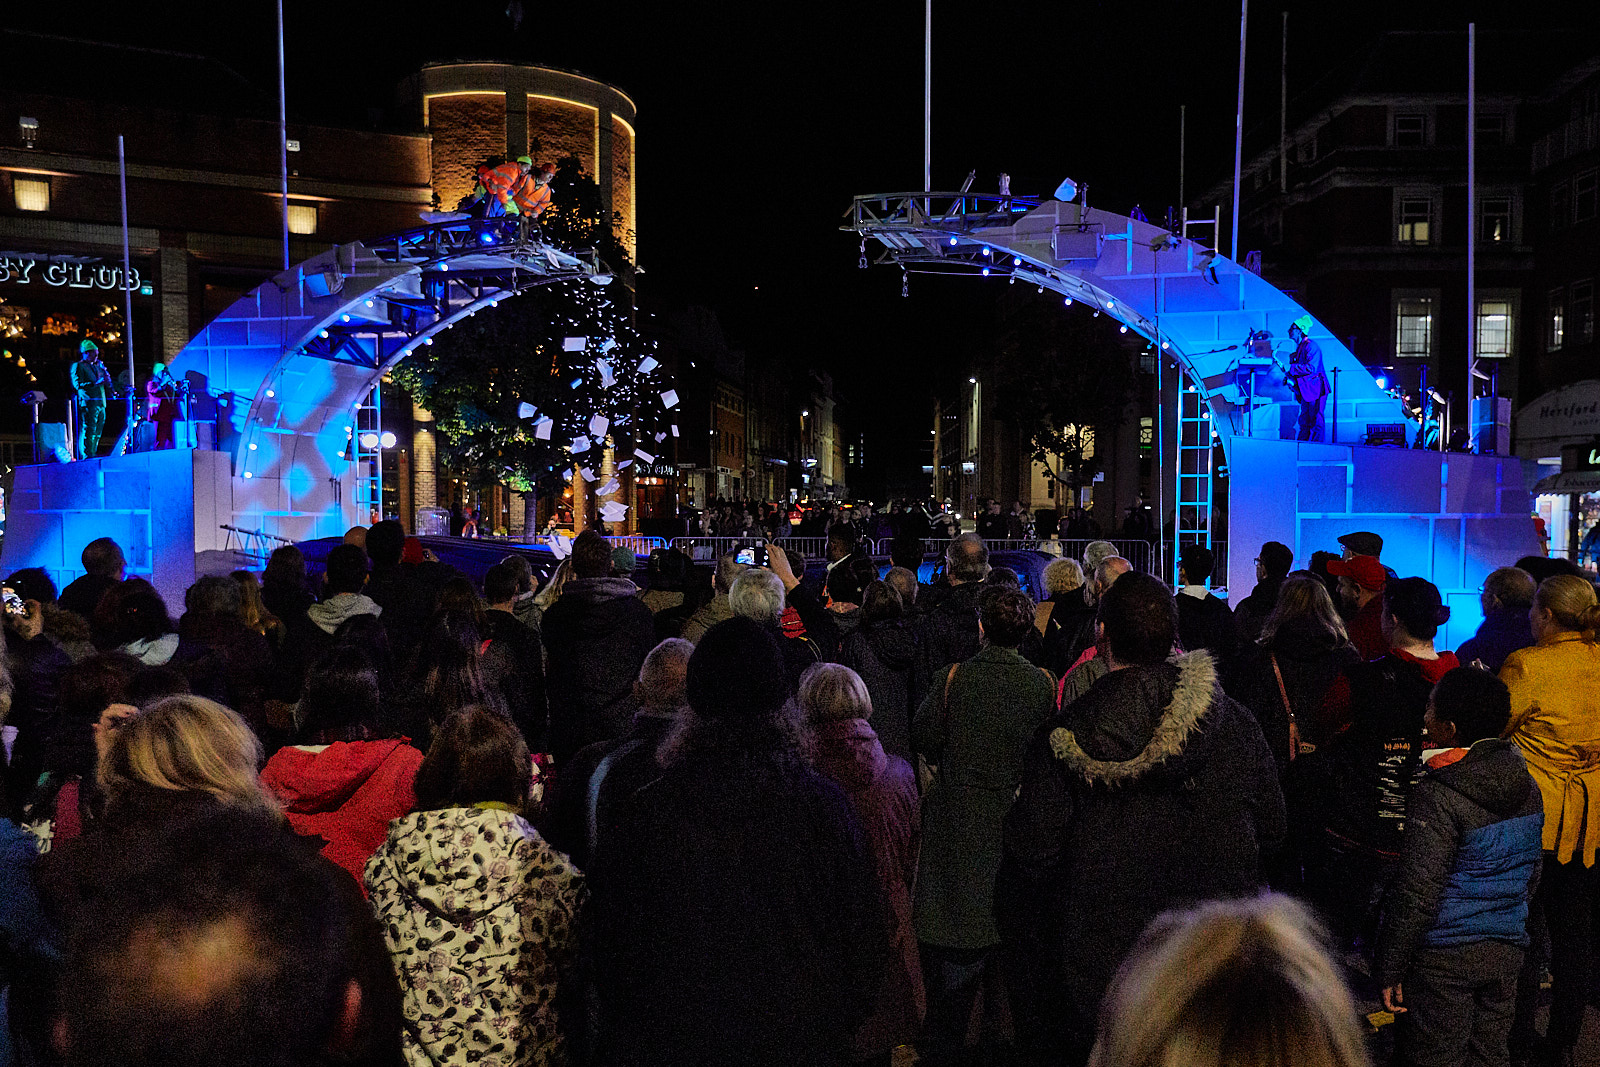 It is nighttime and the broken bridge is dramatically lit in blue. Actors are at the top of the bridge, looking down as a shower of paper scatters to the ground. A large audience looks on at the performance.